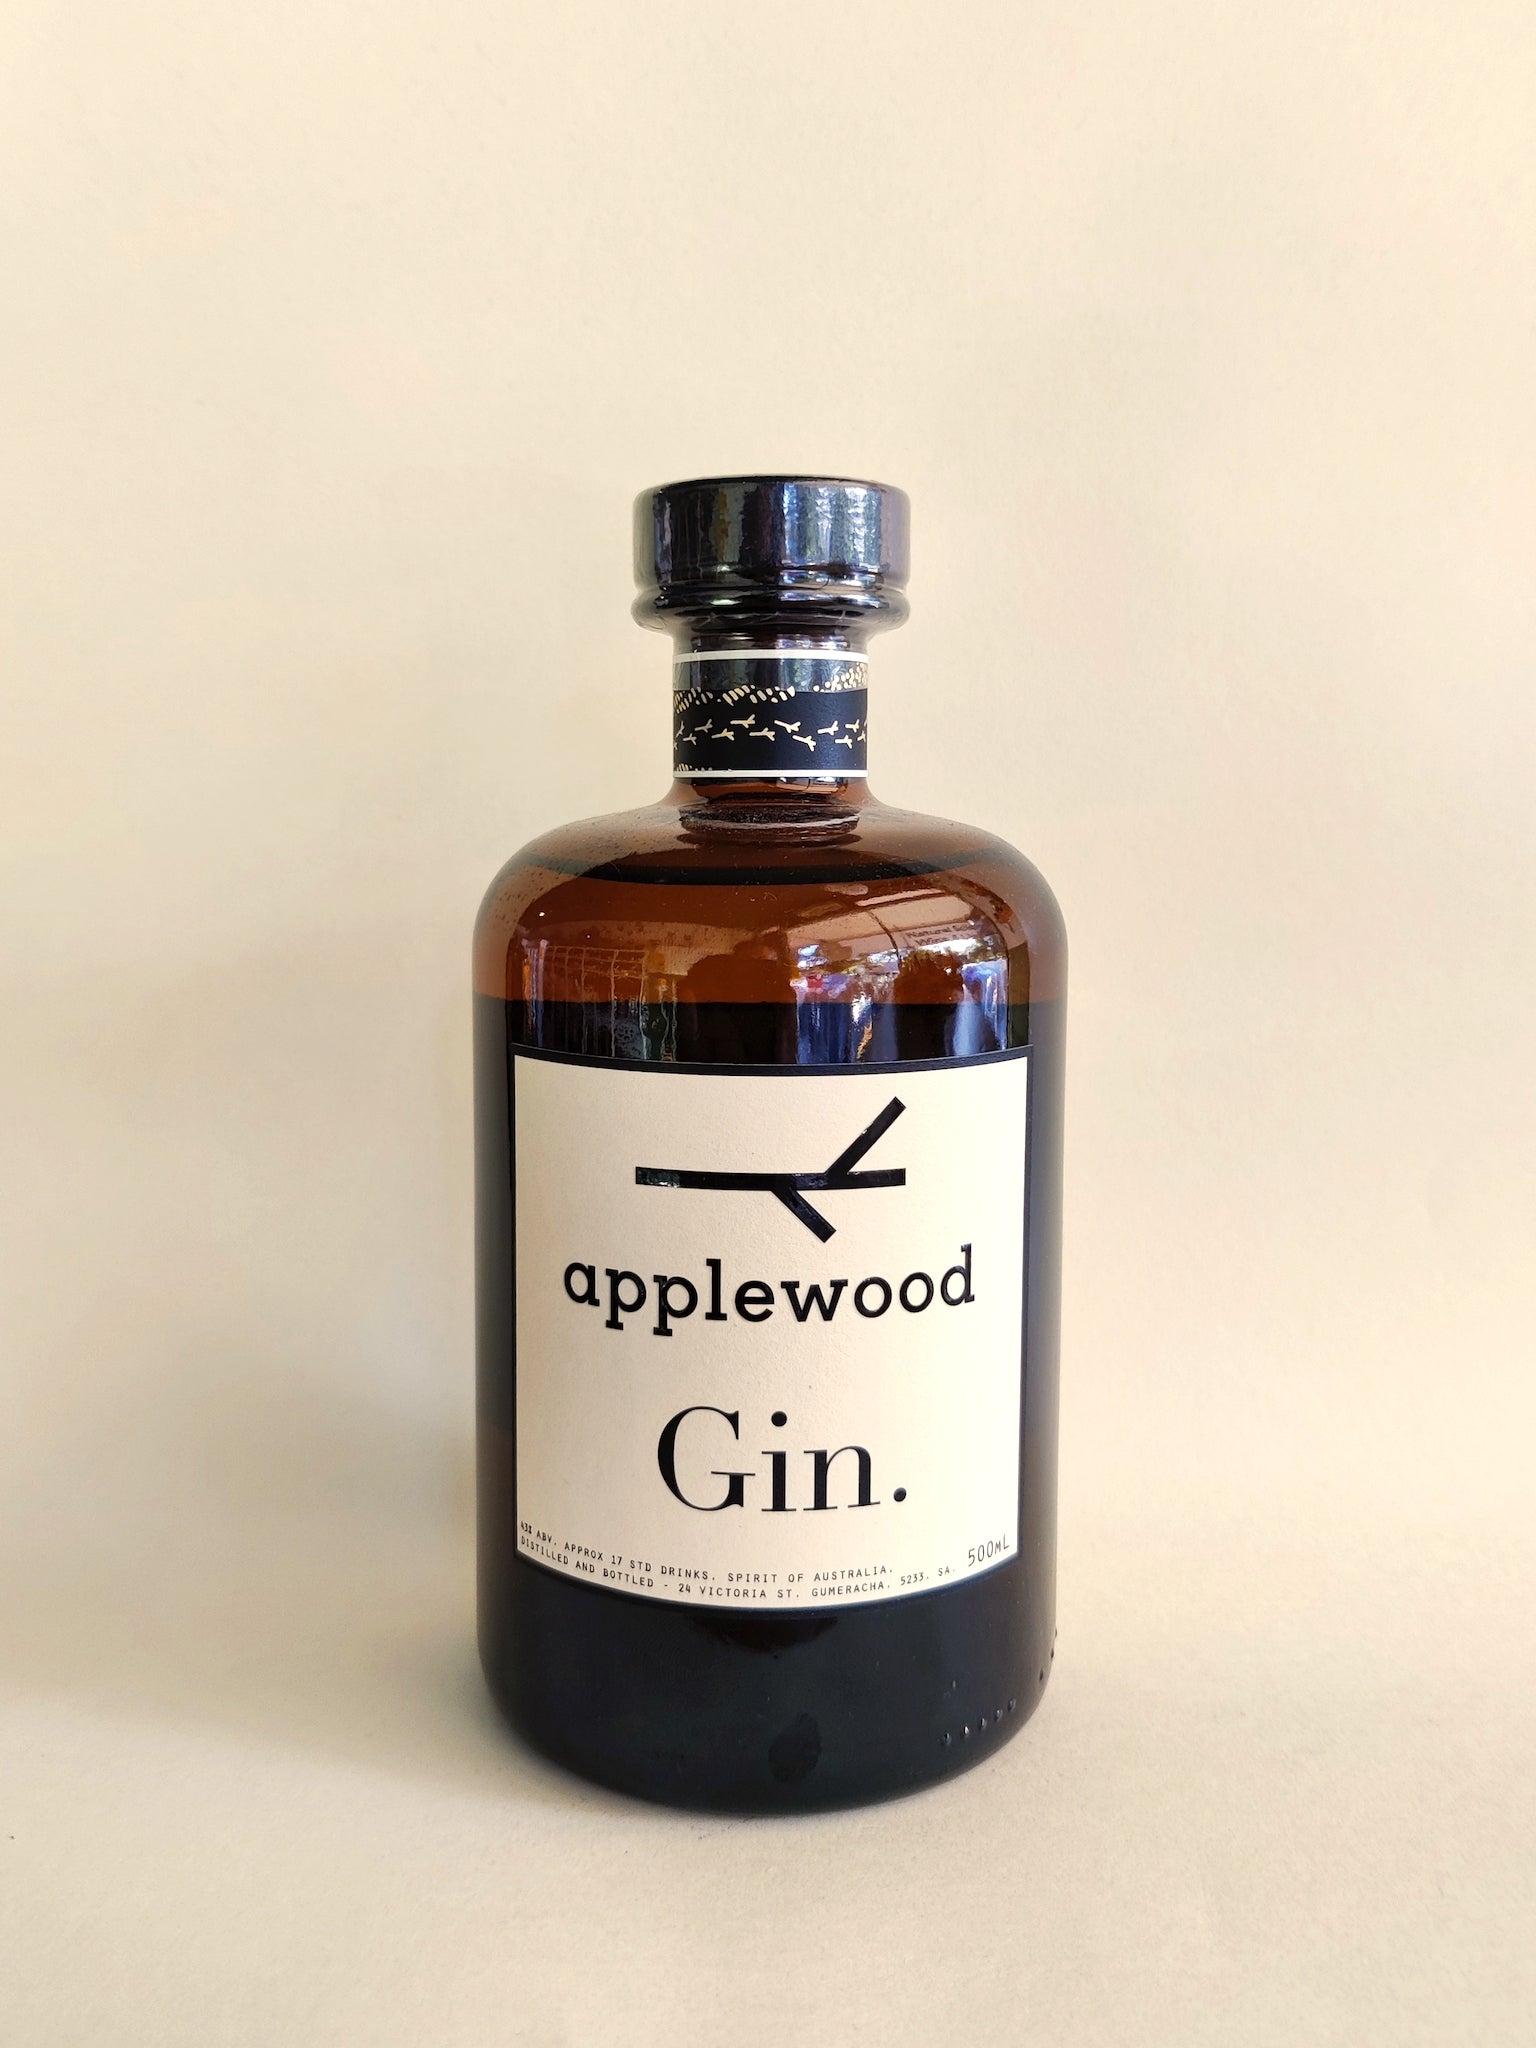 A bottle of Applewood Signature Gin from Adelaide Hills, South Australia. 